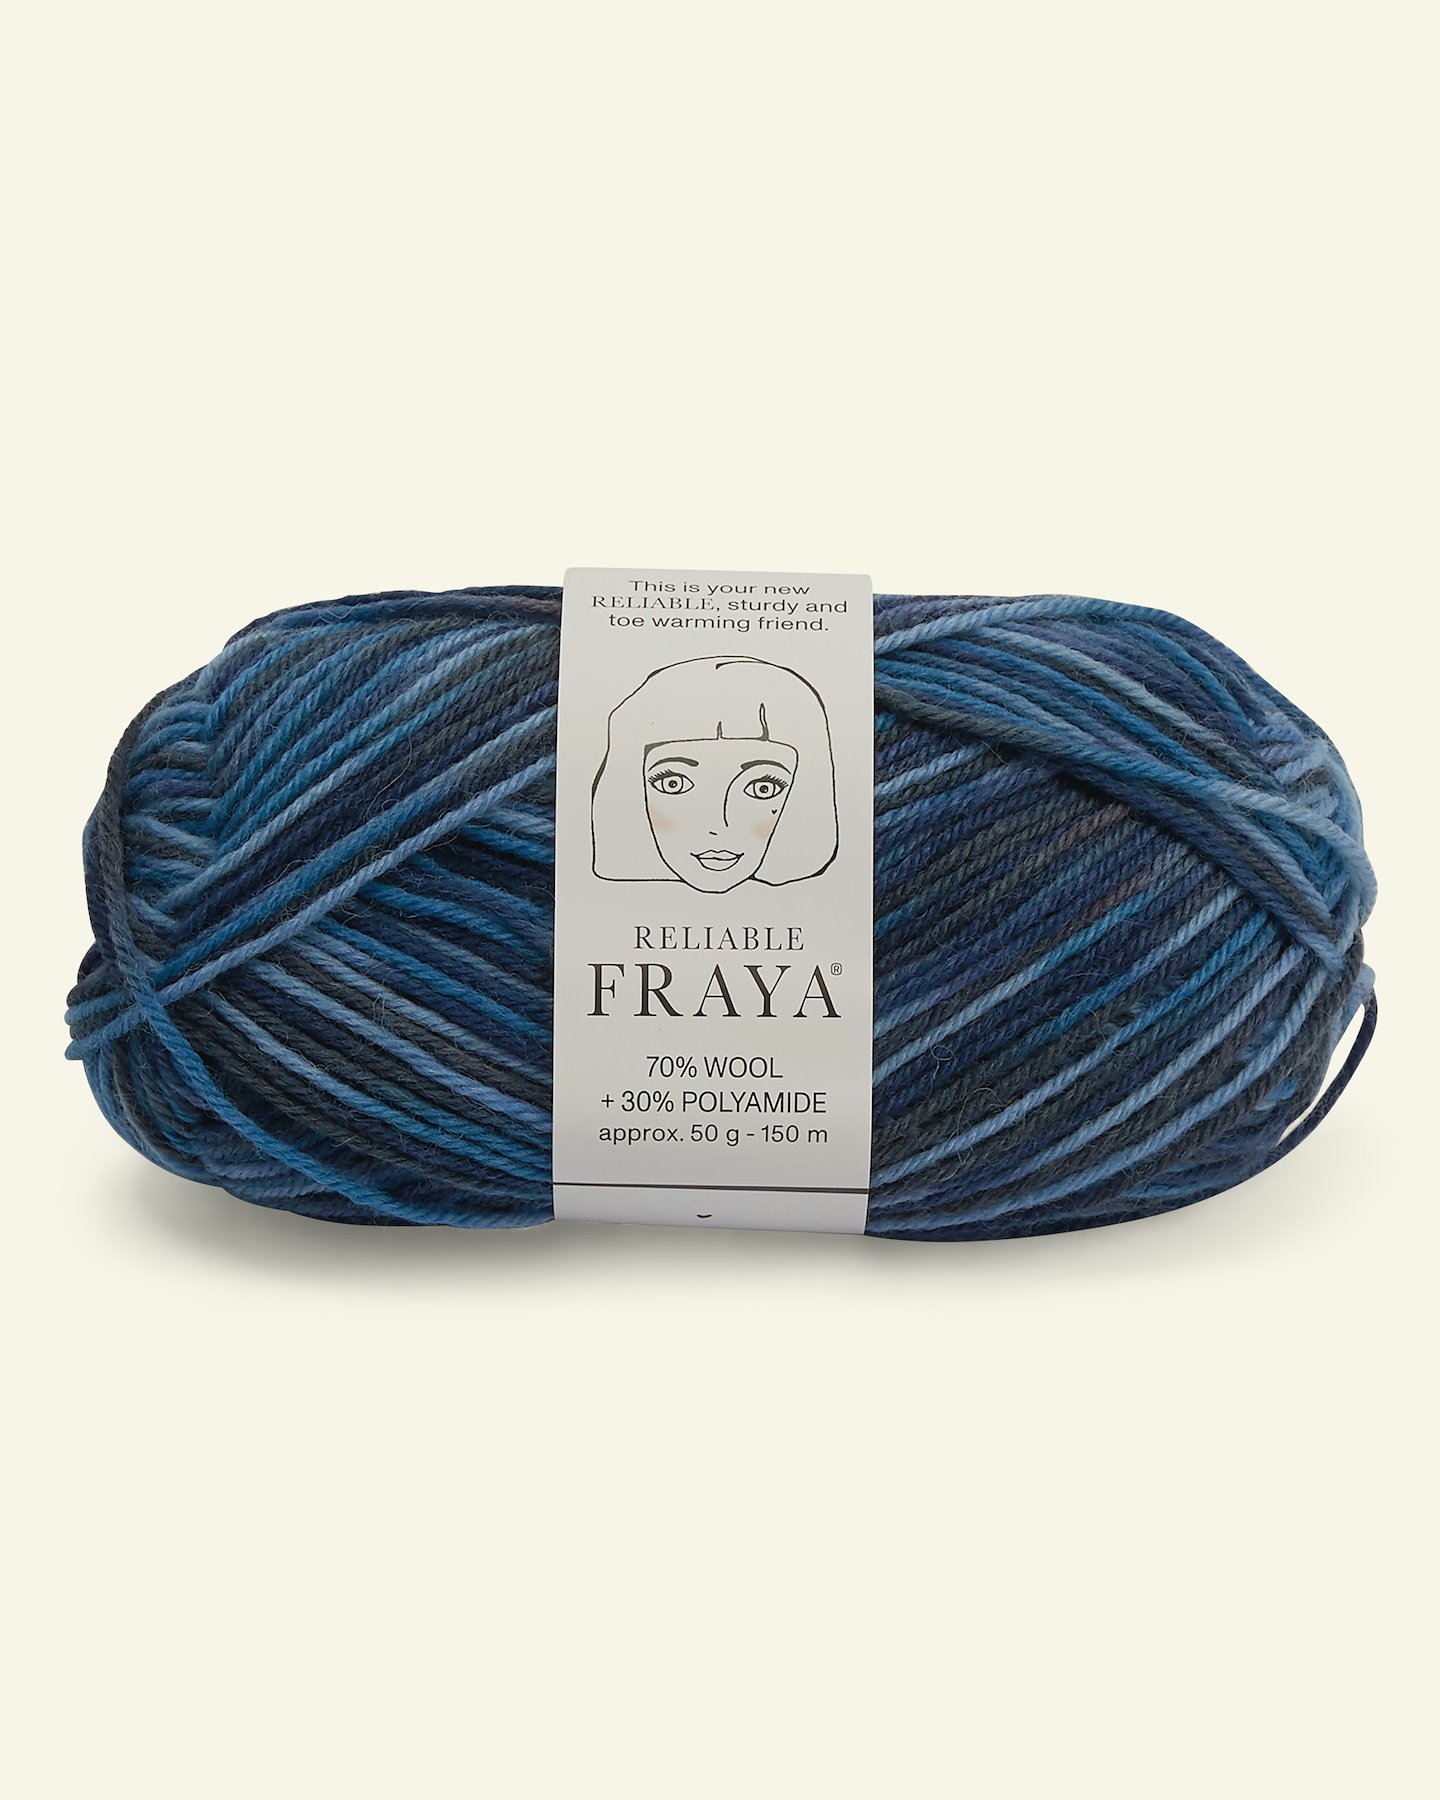 FRAYA, wool yarn "Reliable", blue/navy mix col. 90001197_pack